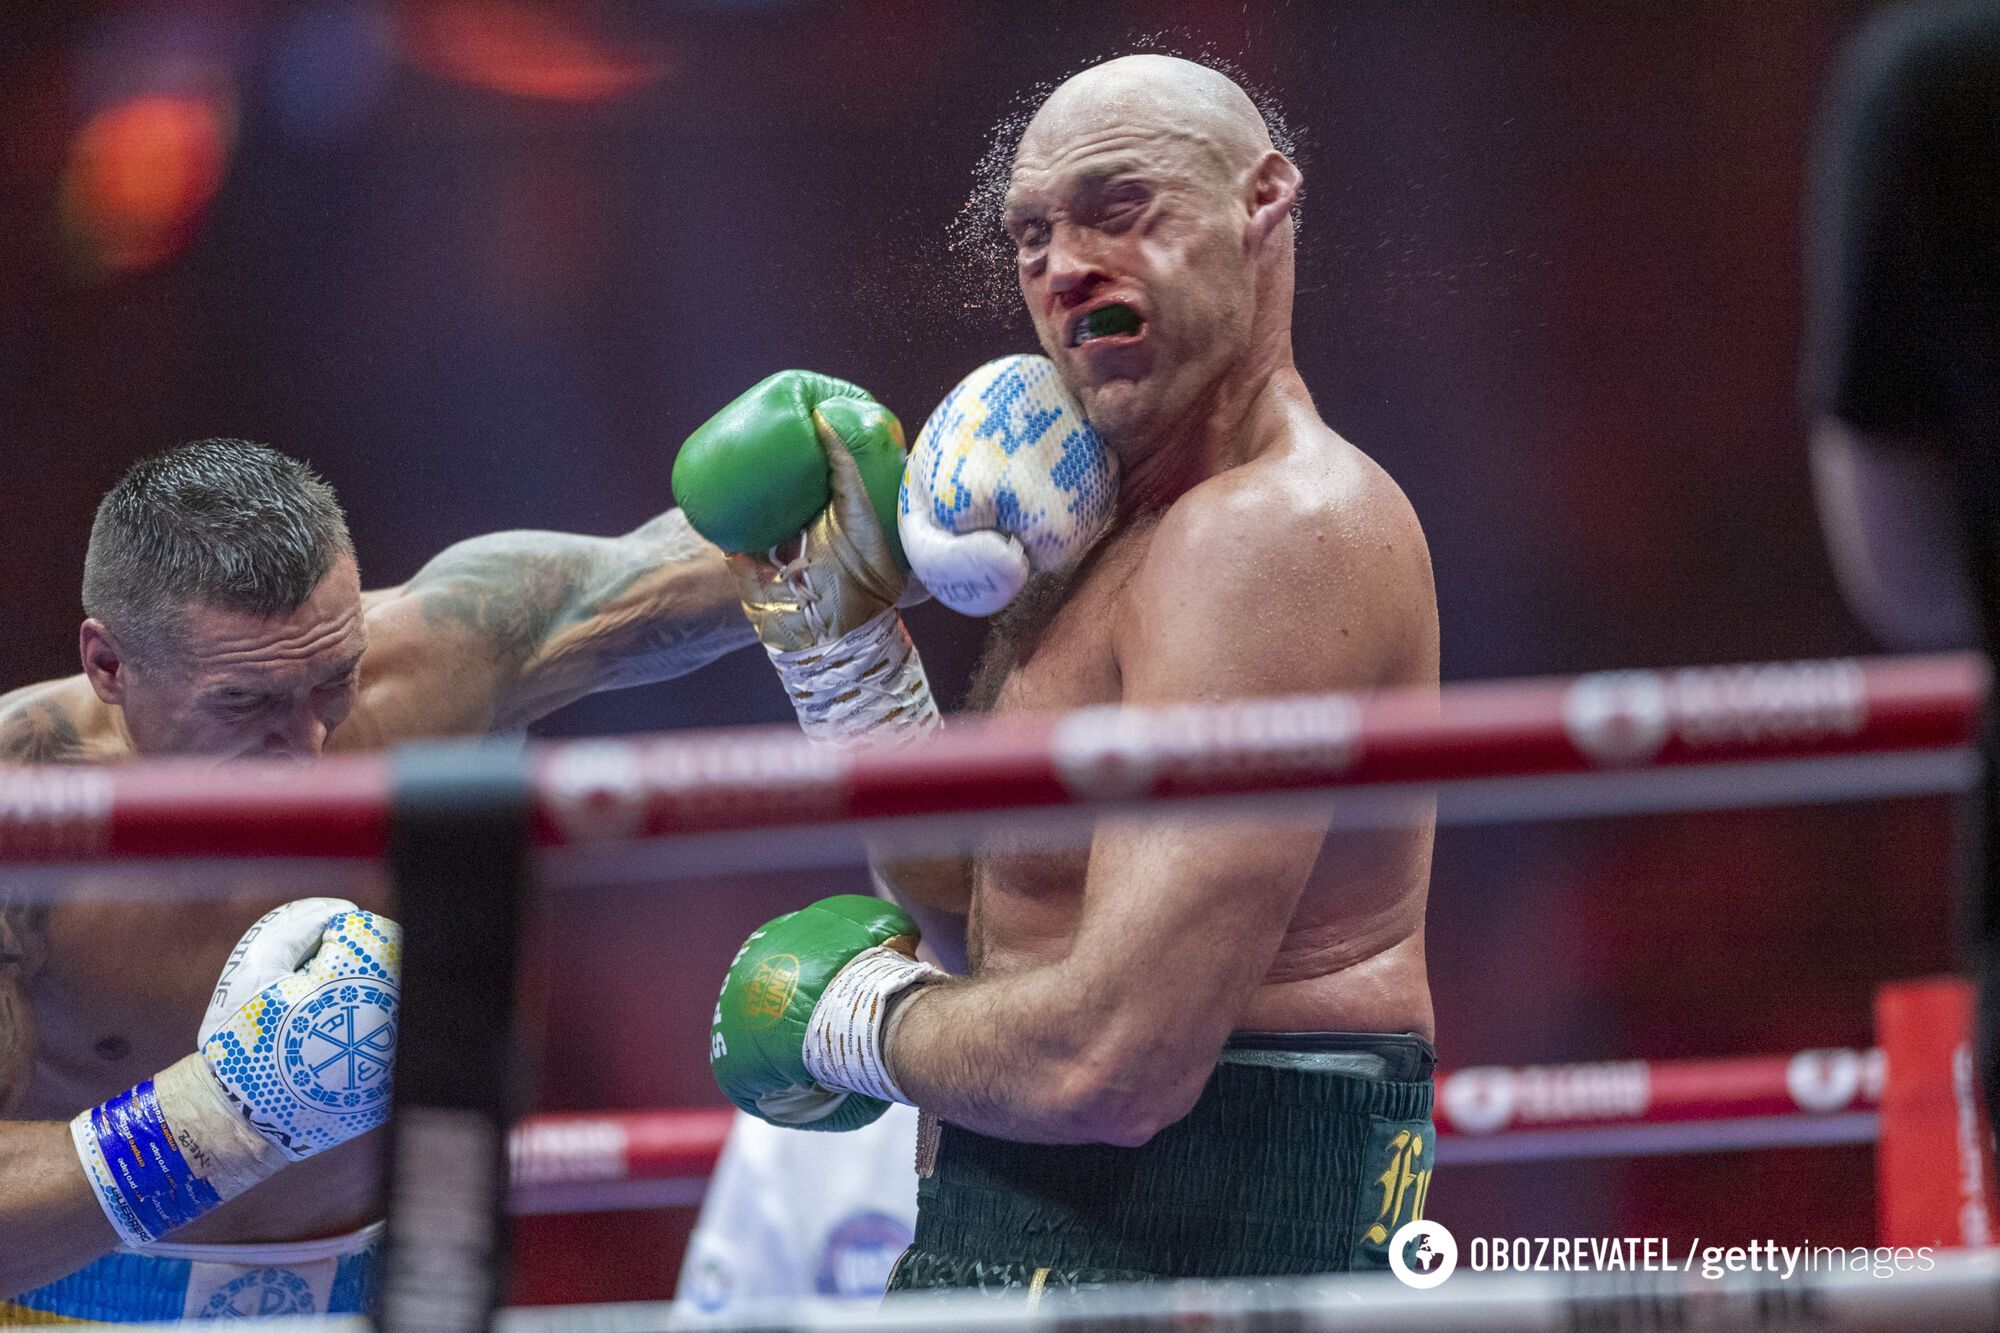 ''Clowning, not boxing'': former world champion from Russia assessed the Usyk – Fury fight